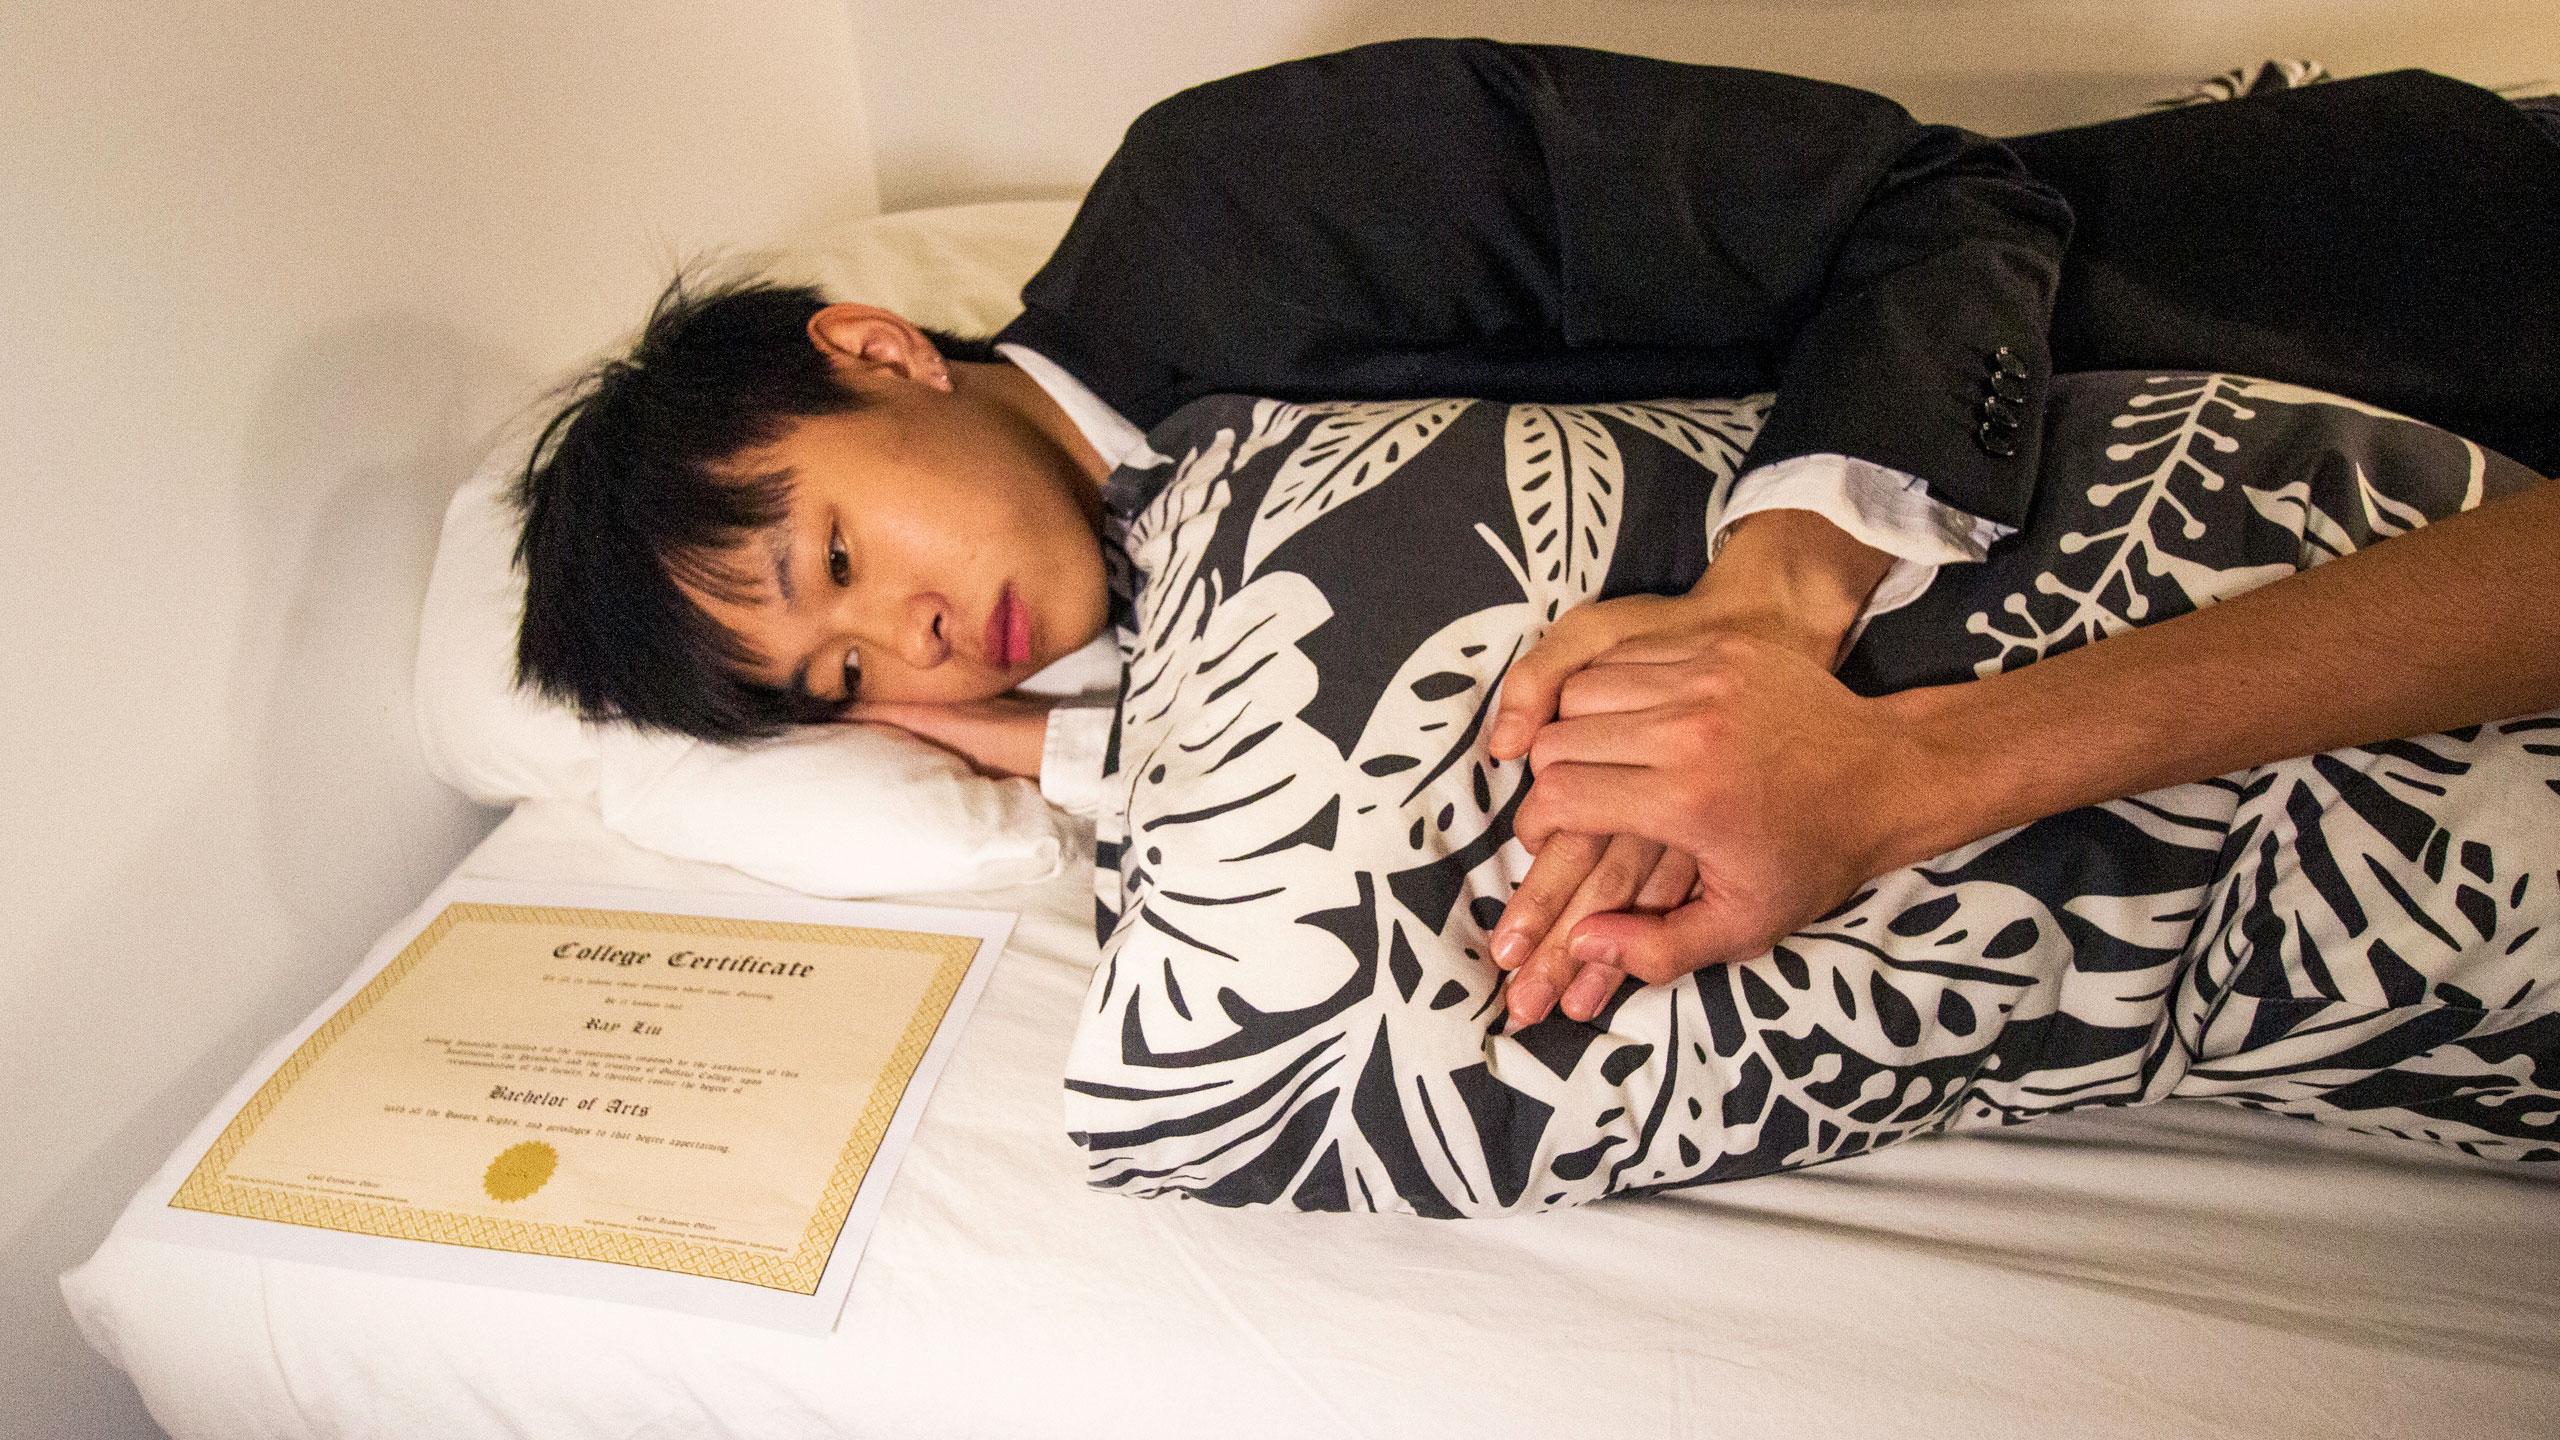 Student lies in bed solemnly with a degree next to him